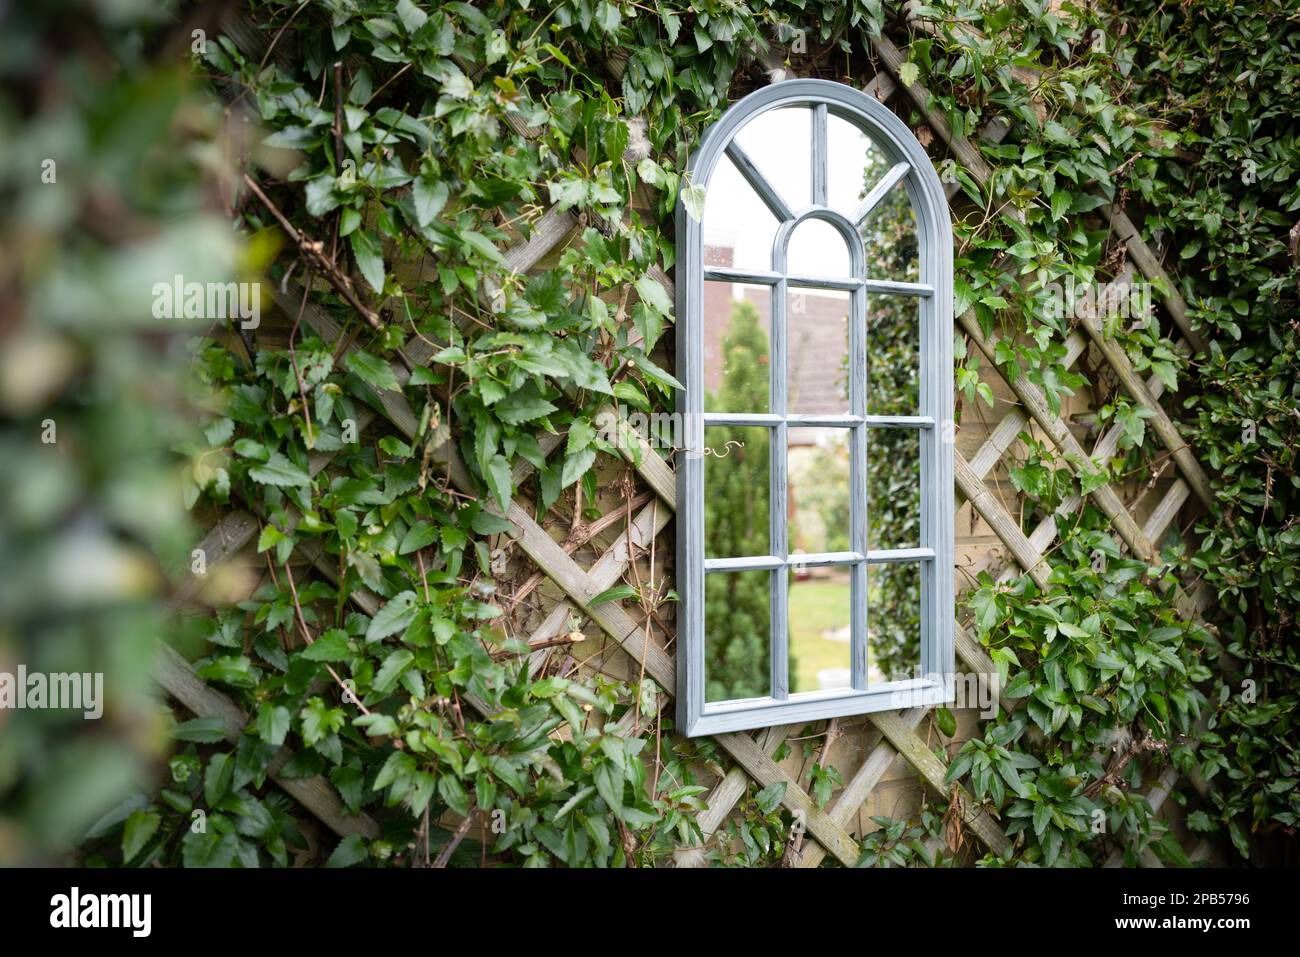 Shallow focus of a secret garden showing a ornate mirror seen attached to a trellis with vines growing around the frame. Stock Photo